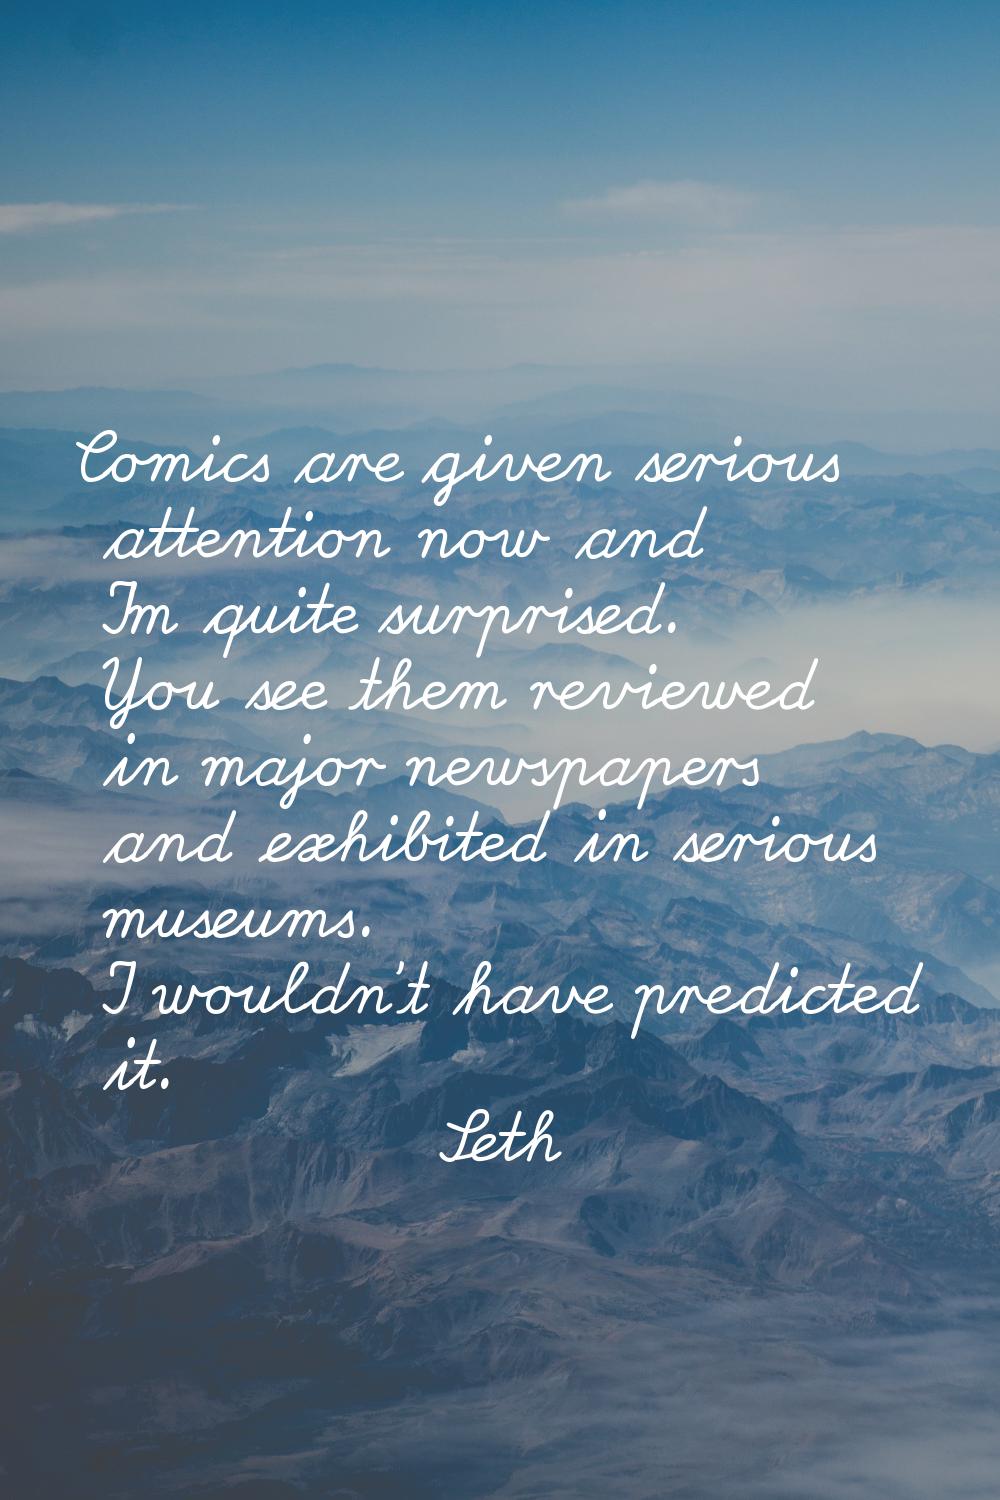 Comics are given serious attention now and I'm quite surprised. You see them reviewed in major news